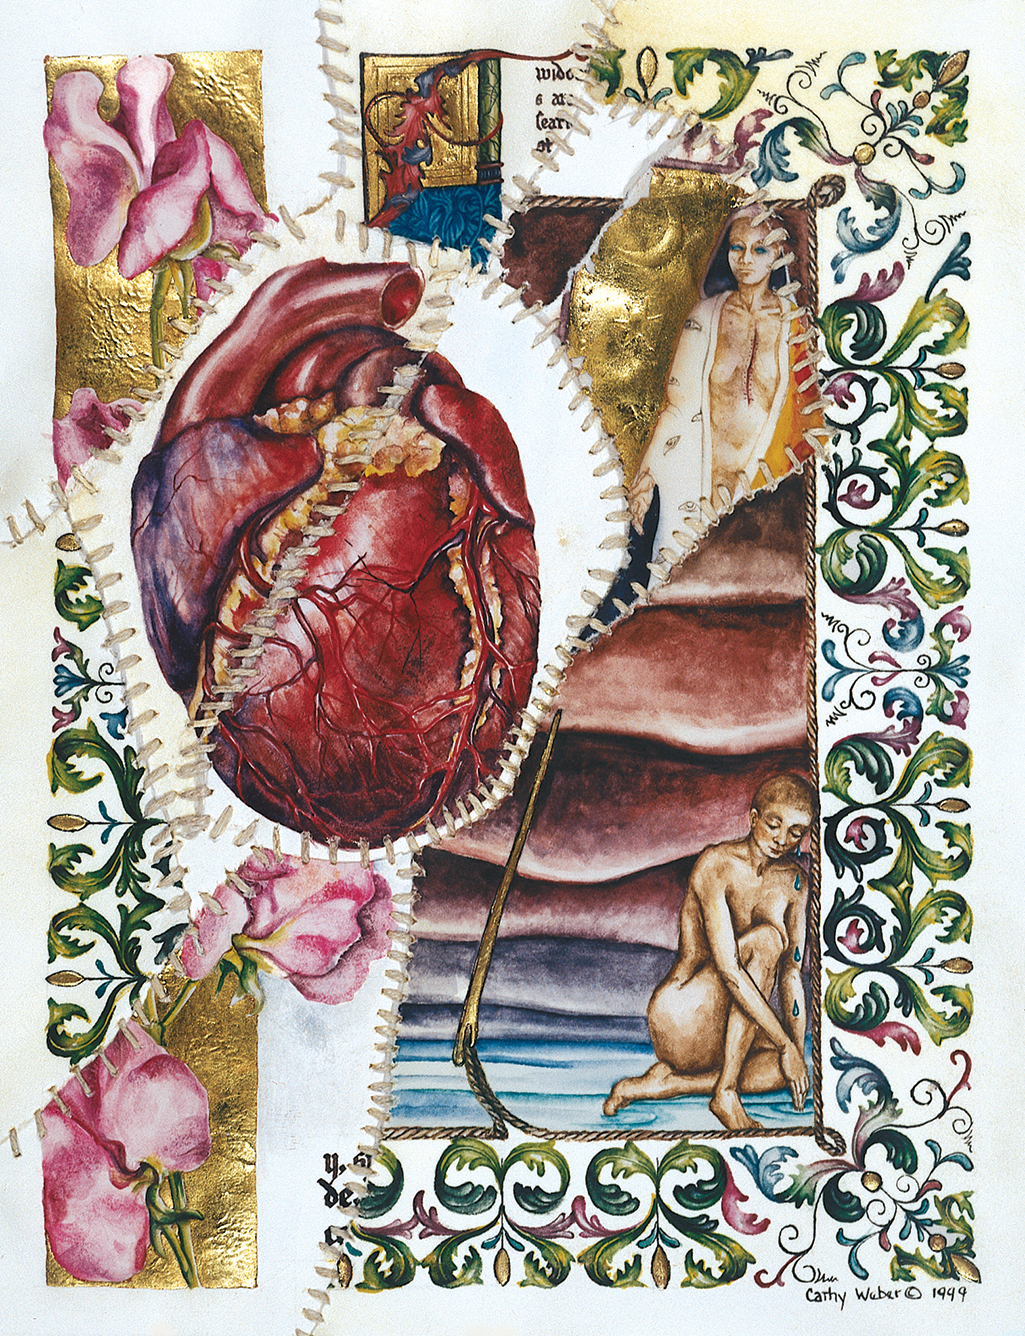 cathy weber - art - painting - woman - watercolor -illumination- montana - painting - parchment - skin - grief - heart - blood